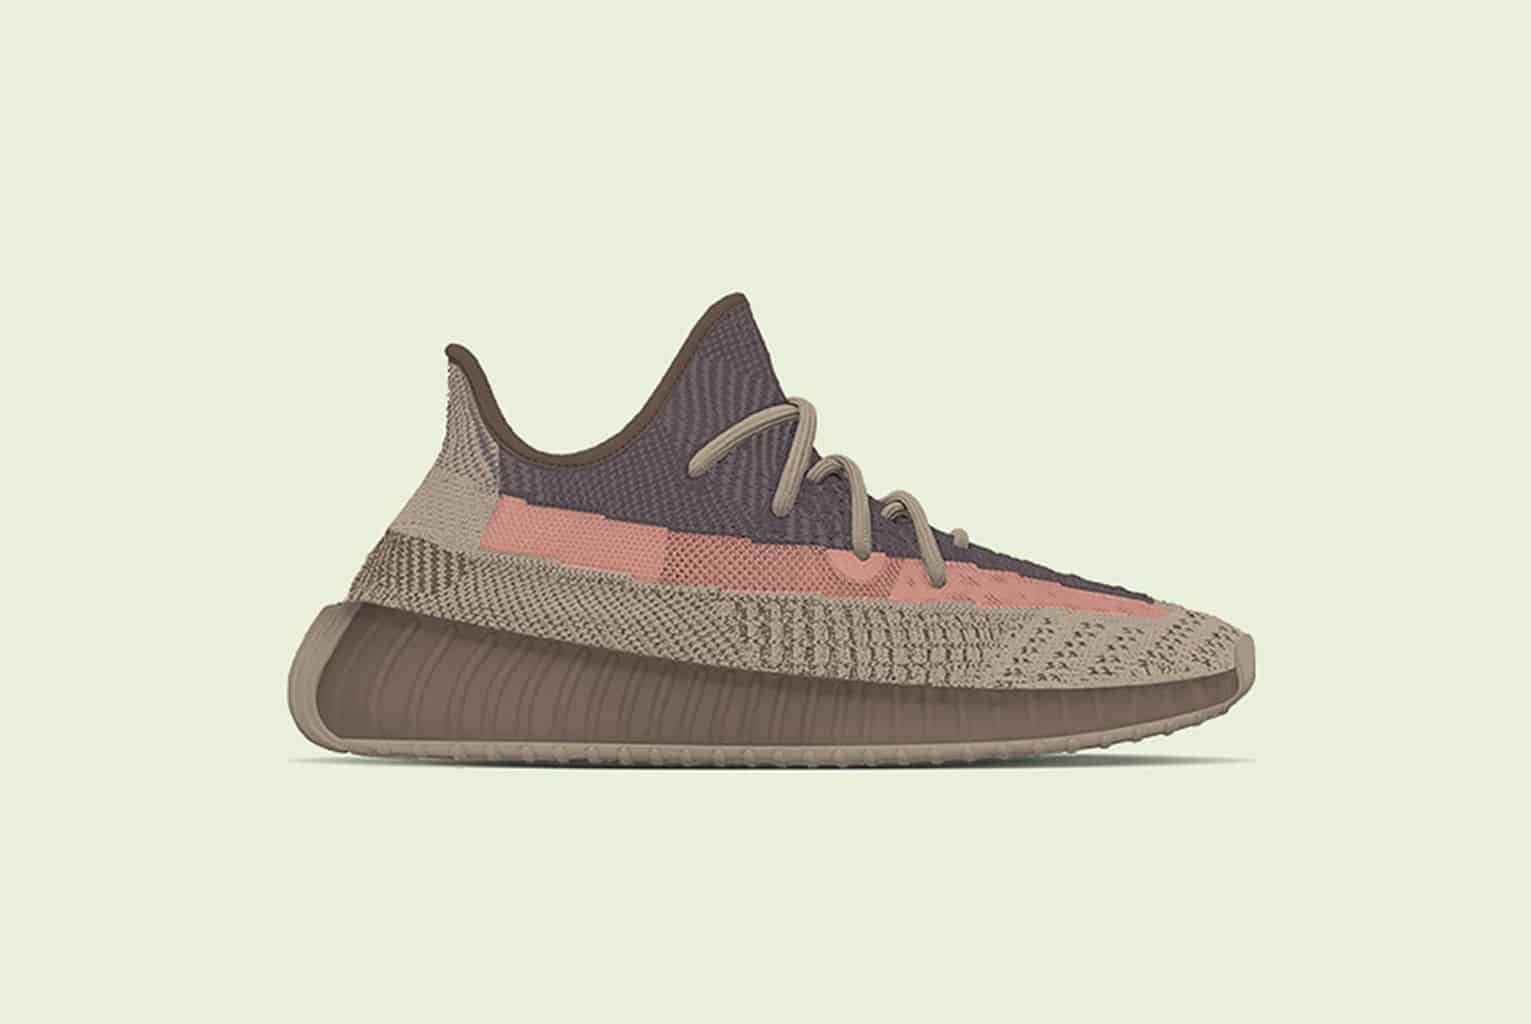 The Adidas Yeezy Boost 350 V2 “Ash Stone” Is Set To Drop In February ...